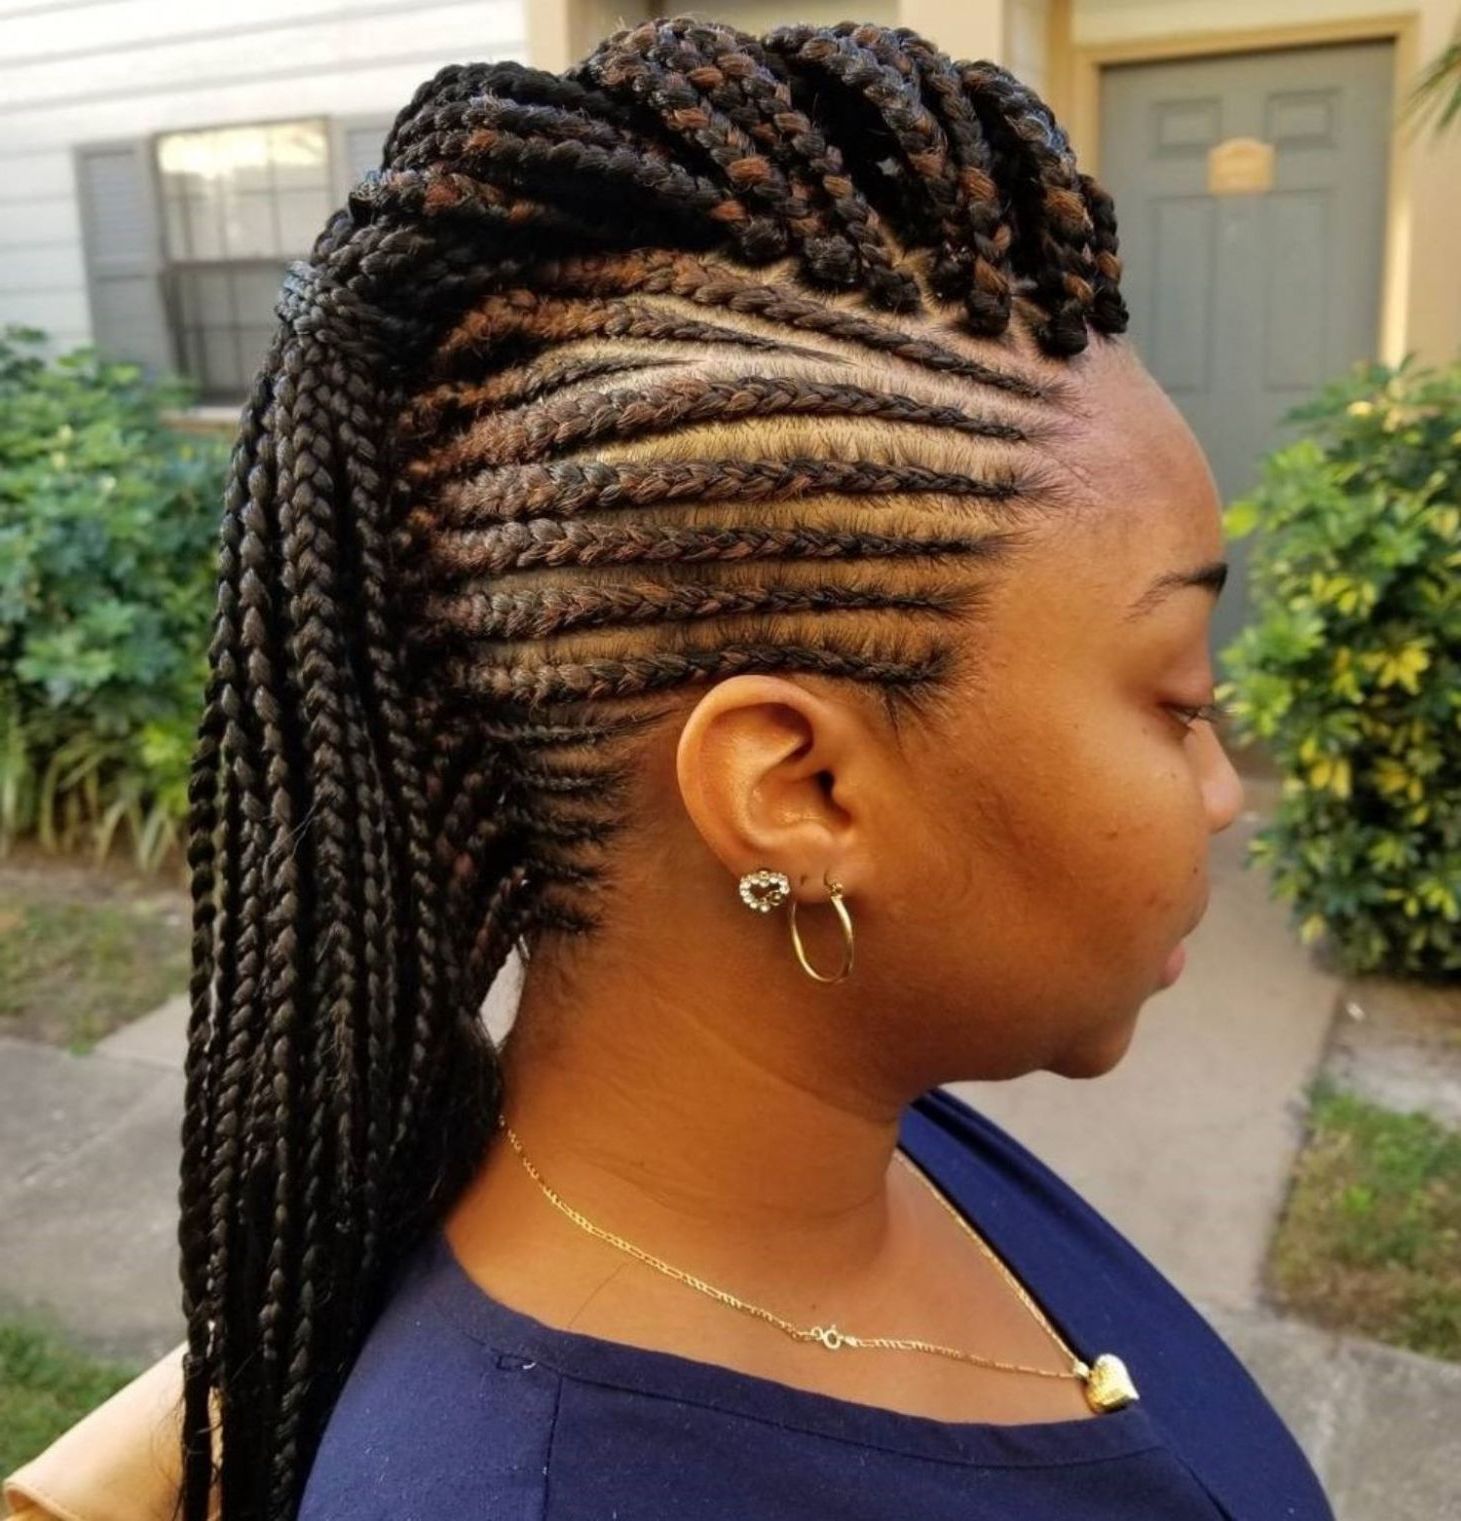 Widely Used Full Braided Mohawk Hairstyles Intended For 70 Best Black Braided Hairstyles That Turn Heads In  (View 15 of 20)